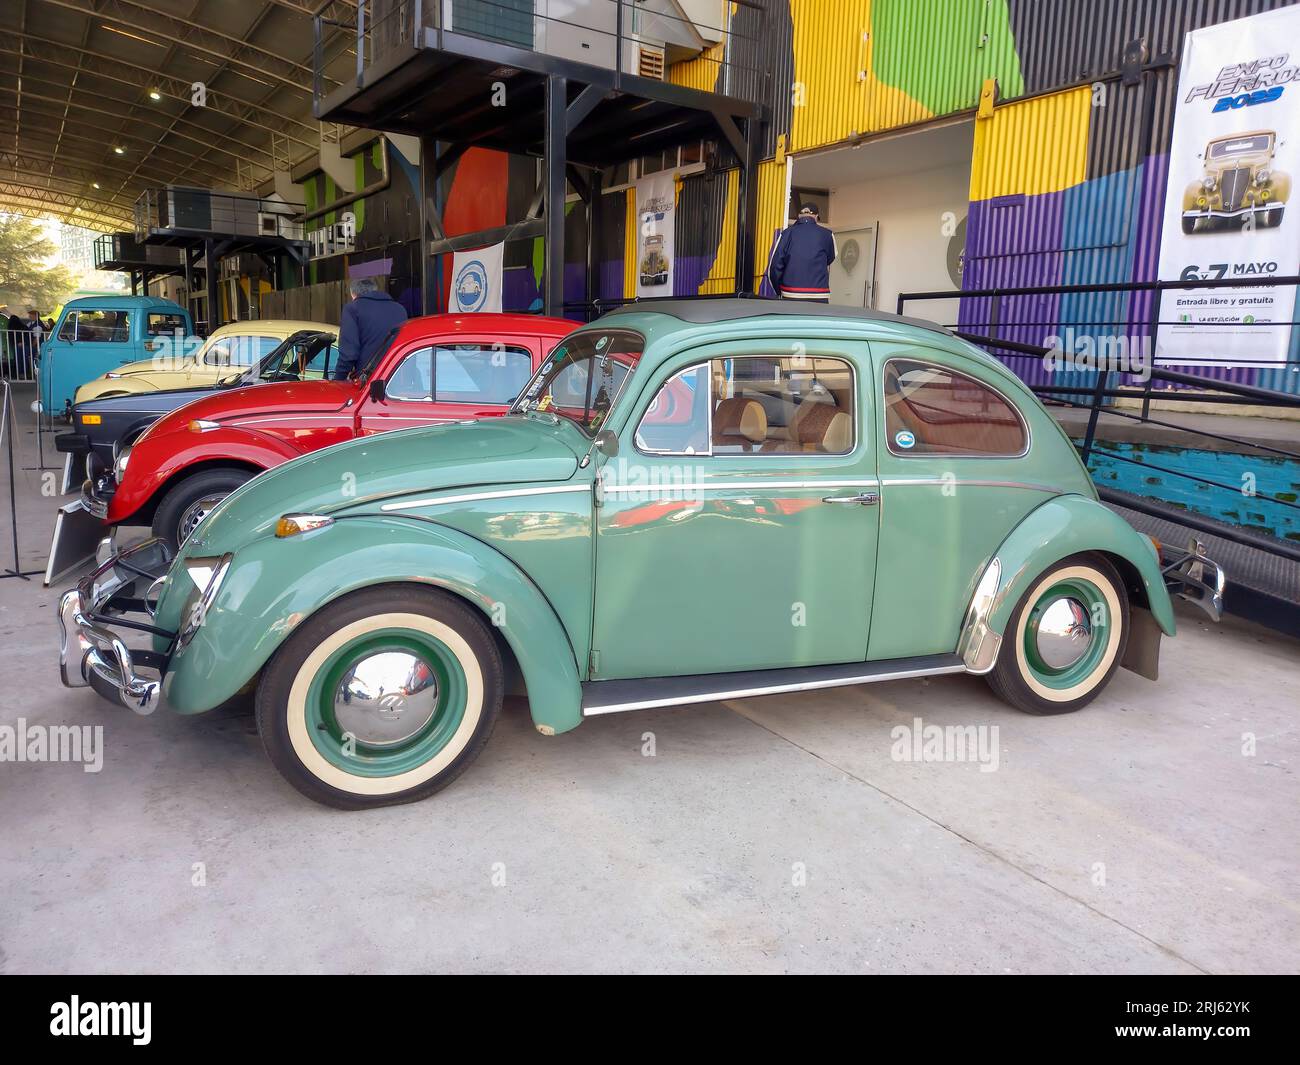 Old green popular Volkswagen Type 1 Beetle or Bug sedan, air cooled, rear engine, in a colorful warehouse yard. Expo Fierro 2023 classic car show Stock Photo